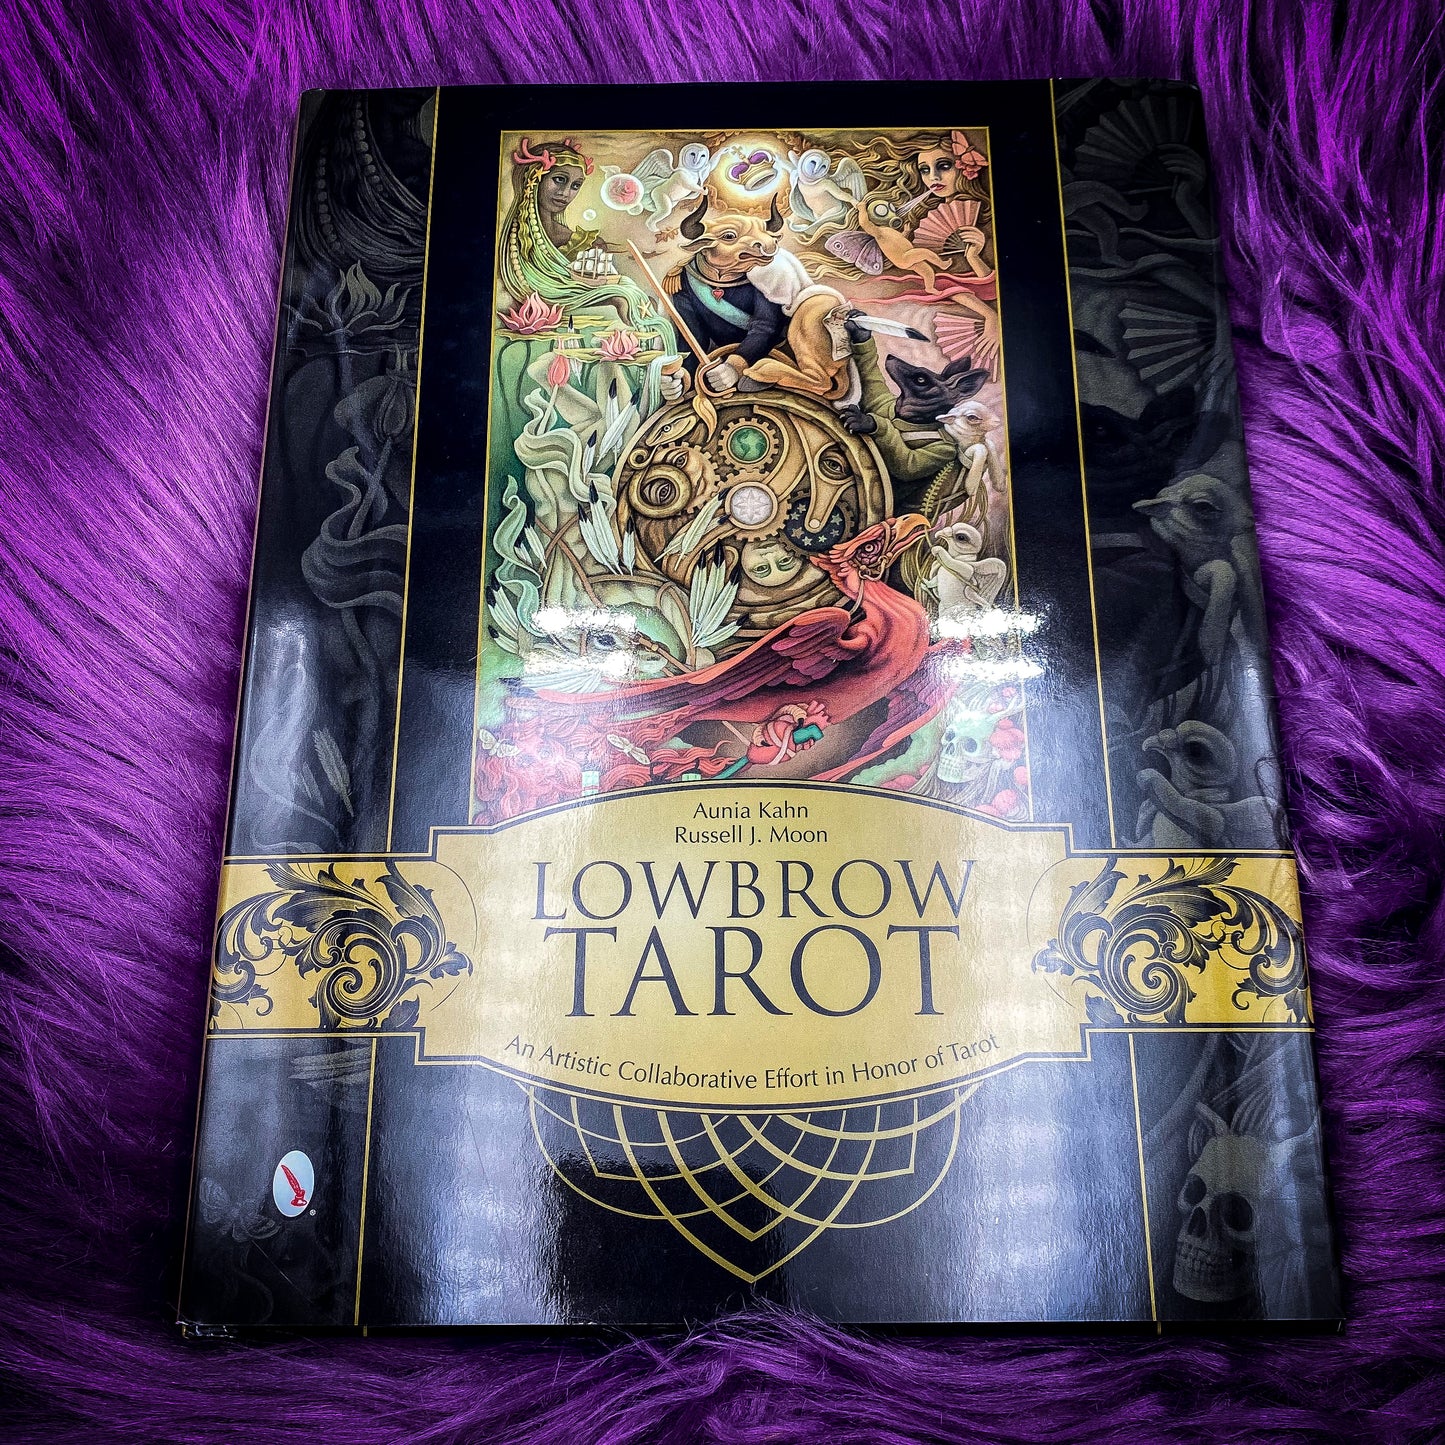 Lowbrow Tarot: An Artistic Collaborative Effort in Honor of Tarot by Schiffer Publishing, Ltd.